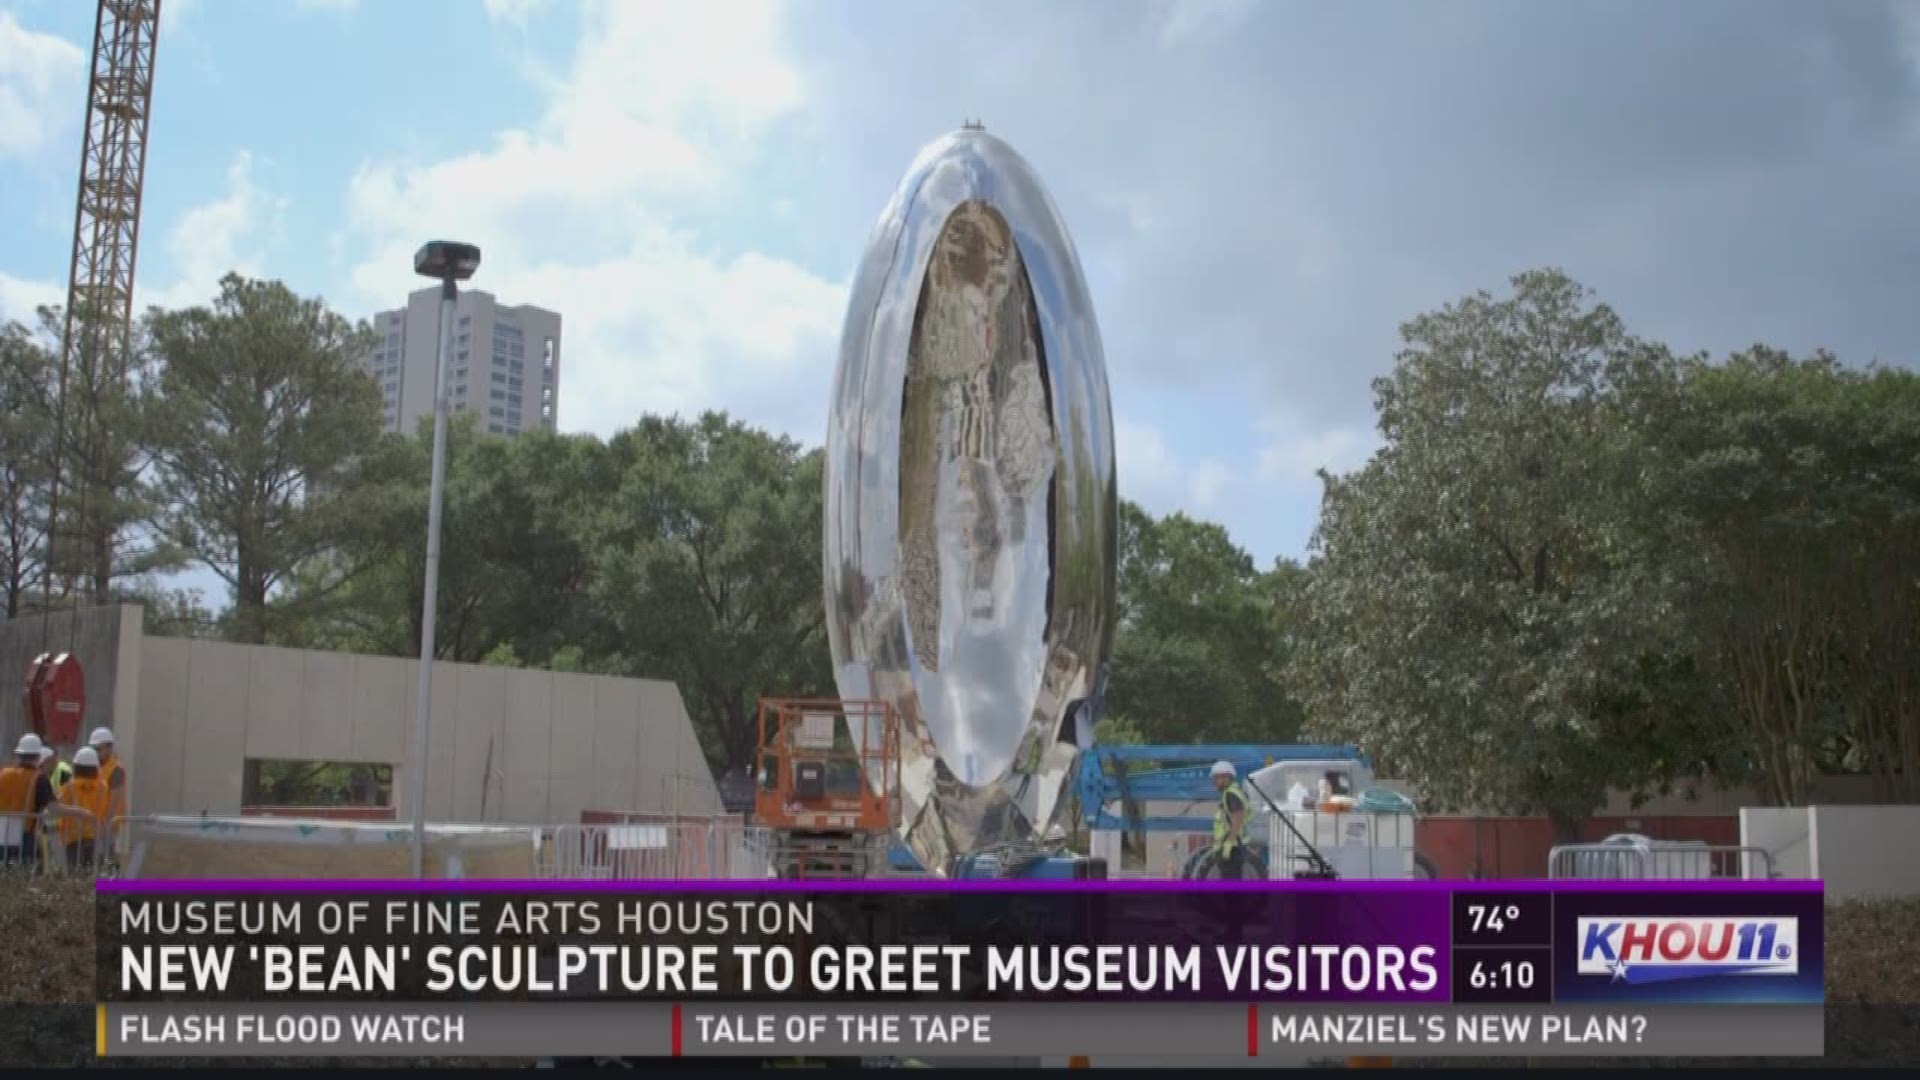 The new "bean" art installation in Houston, similar to the one in Chicago, is causing quite a buzz in the city.